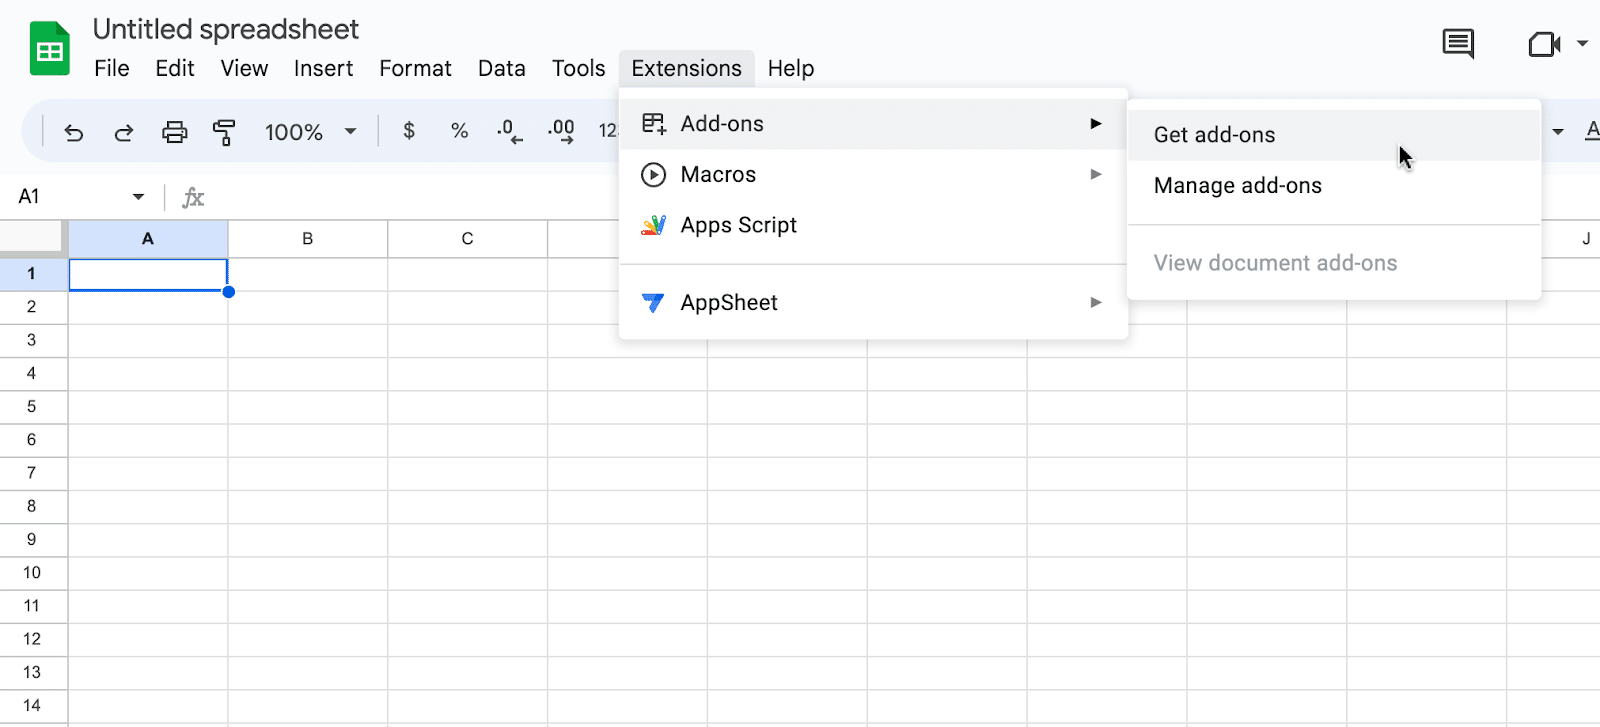 Accessing the Extensions menu in Google Sheets to add new add-ons.